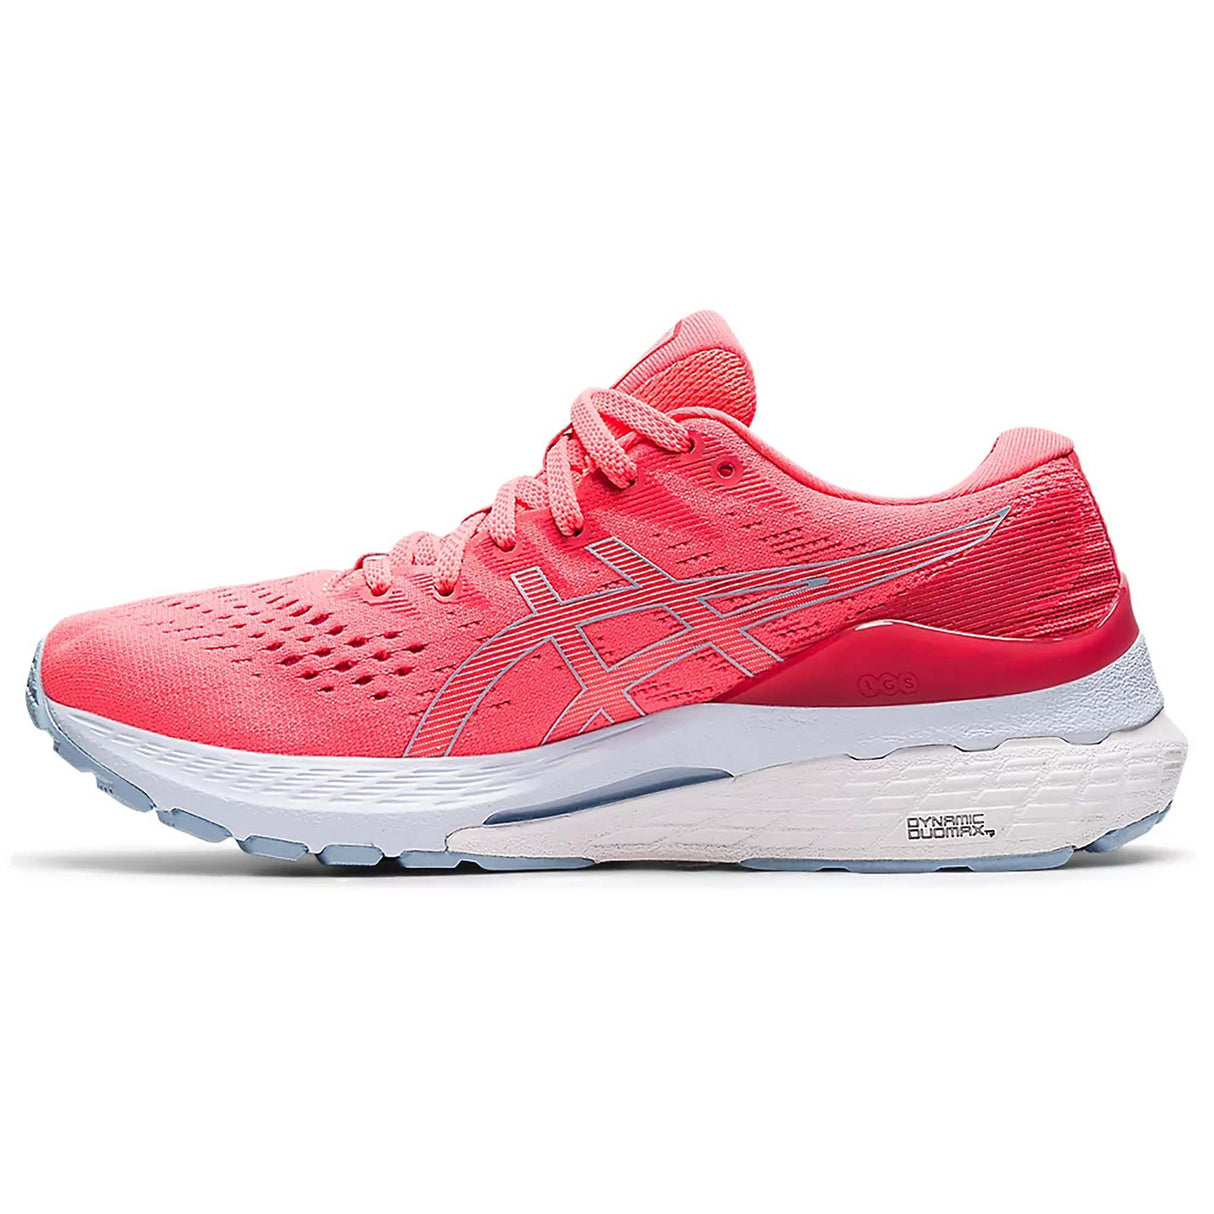 ASICS Gel Kayano 28 running femme blazing coral mist lateral